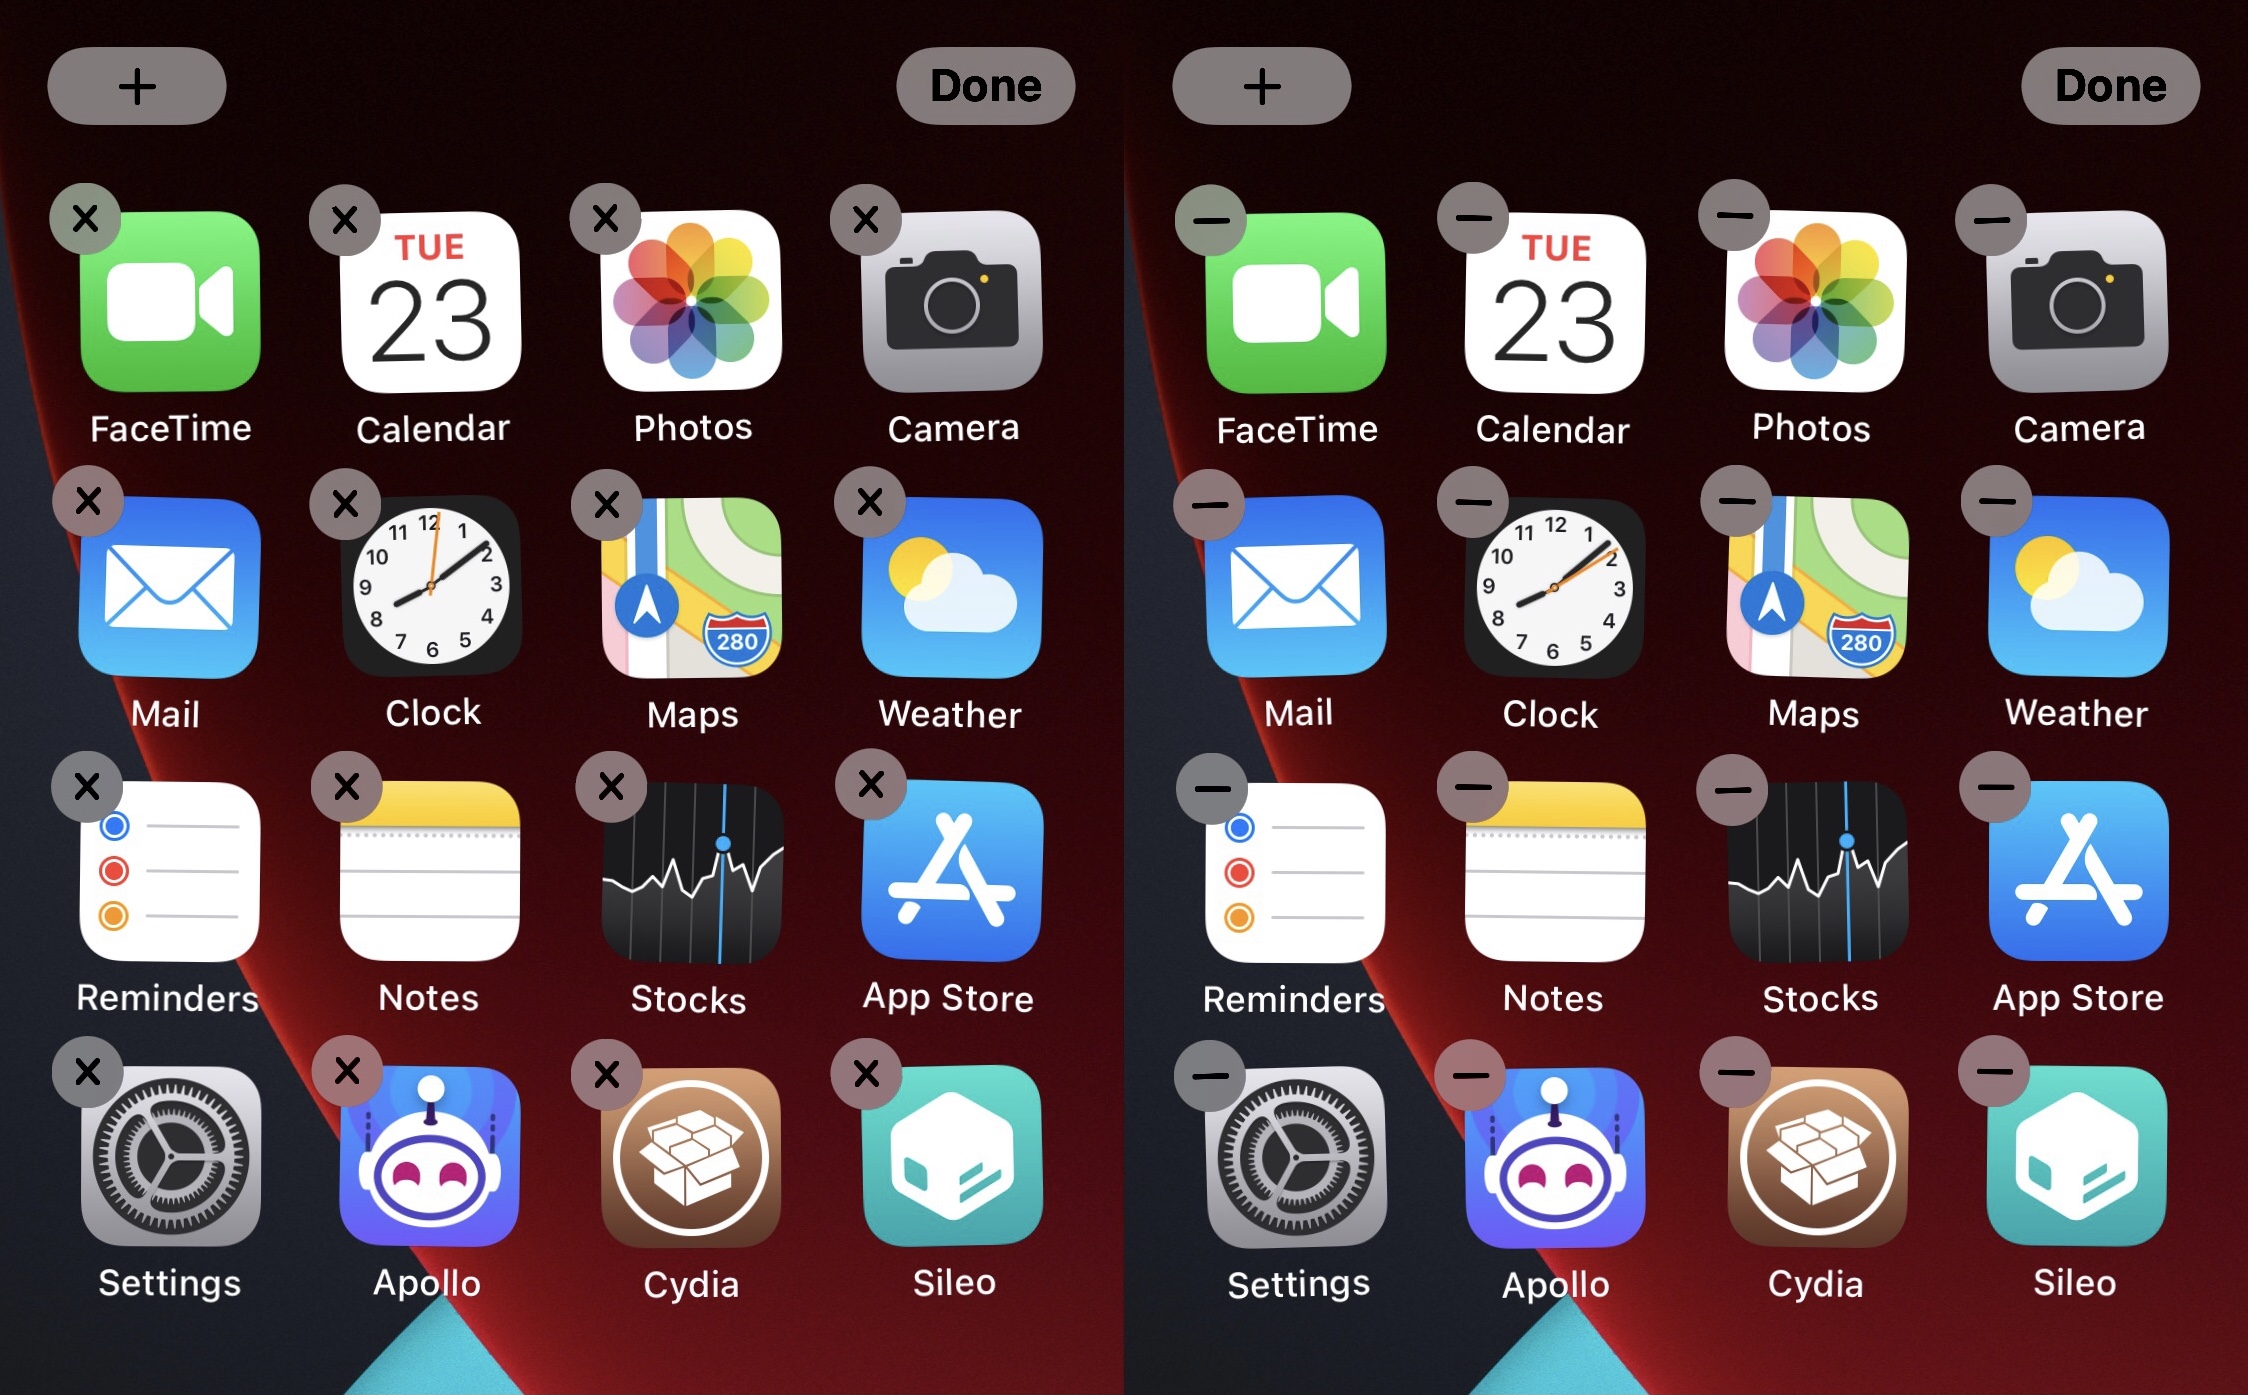 Replace the Home Screen’s minus buttons with delete buttons.